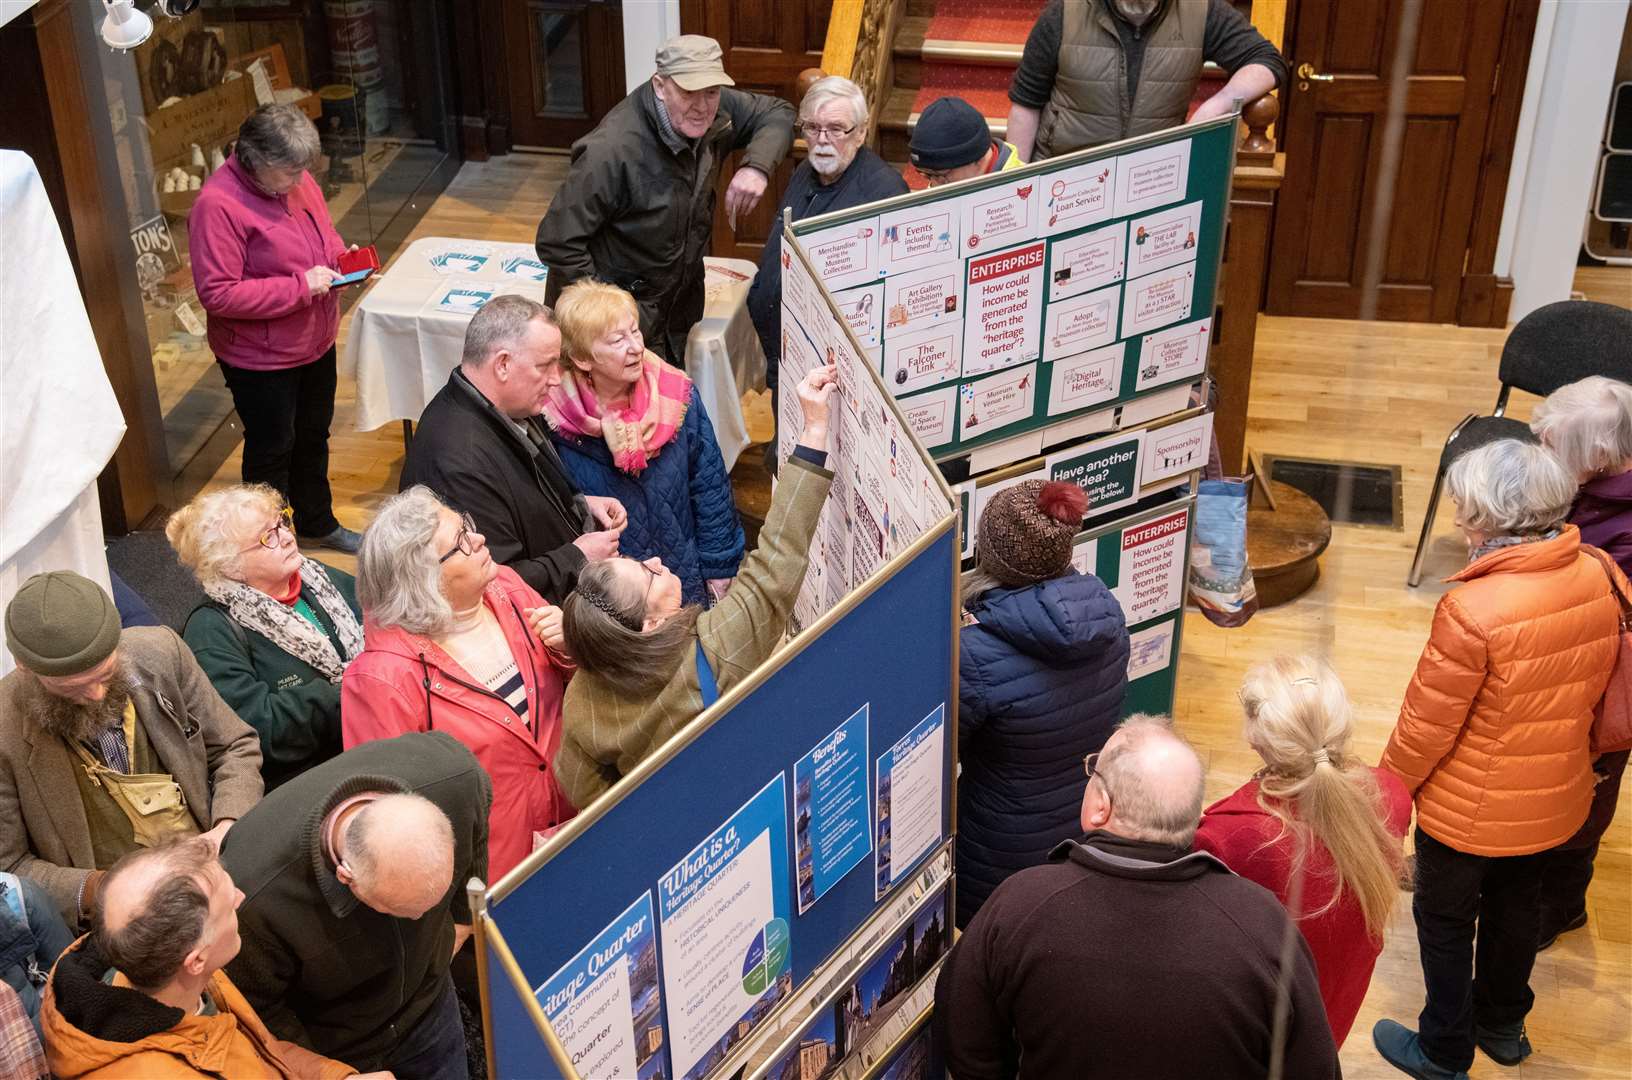 The recent public exhibition about improving the town centre was held in the museum. Picture: Daniel Forsyth